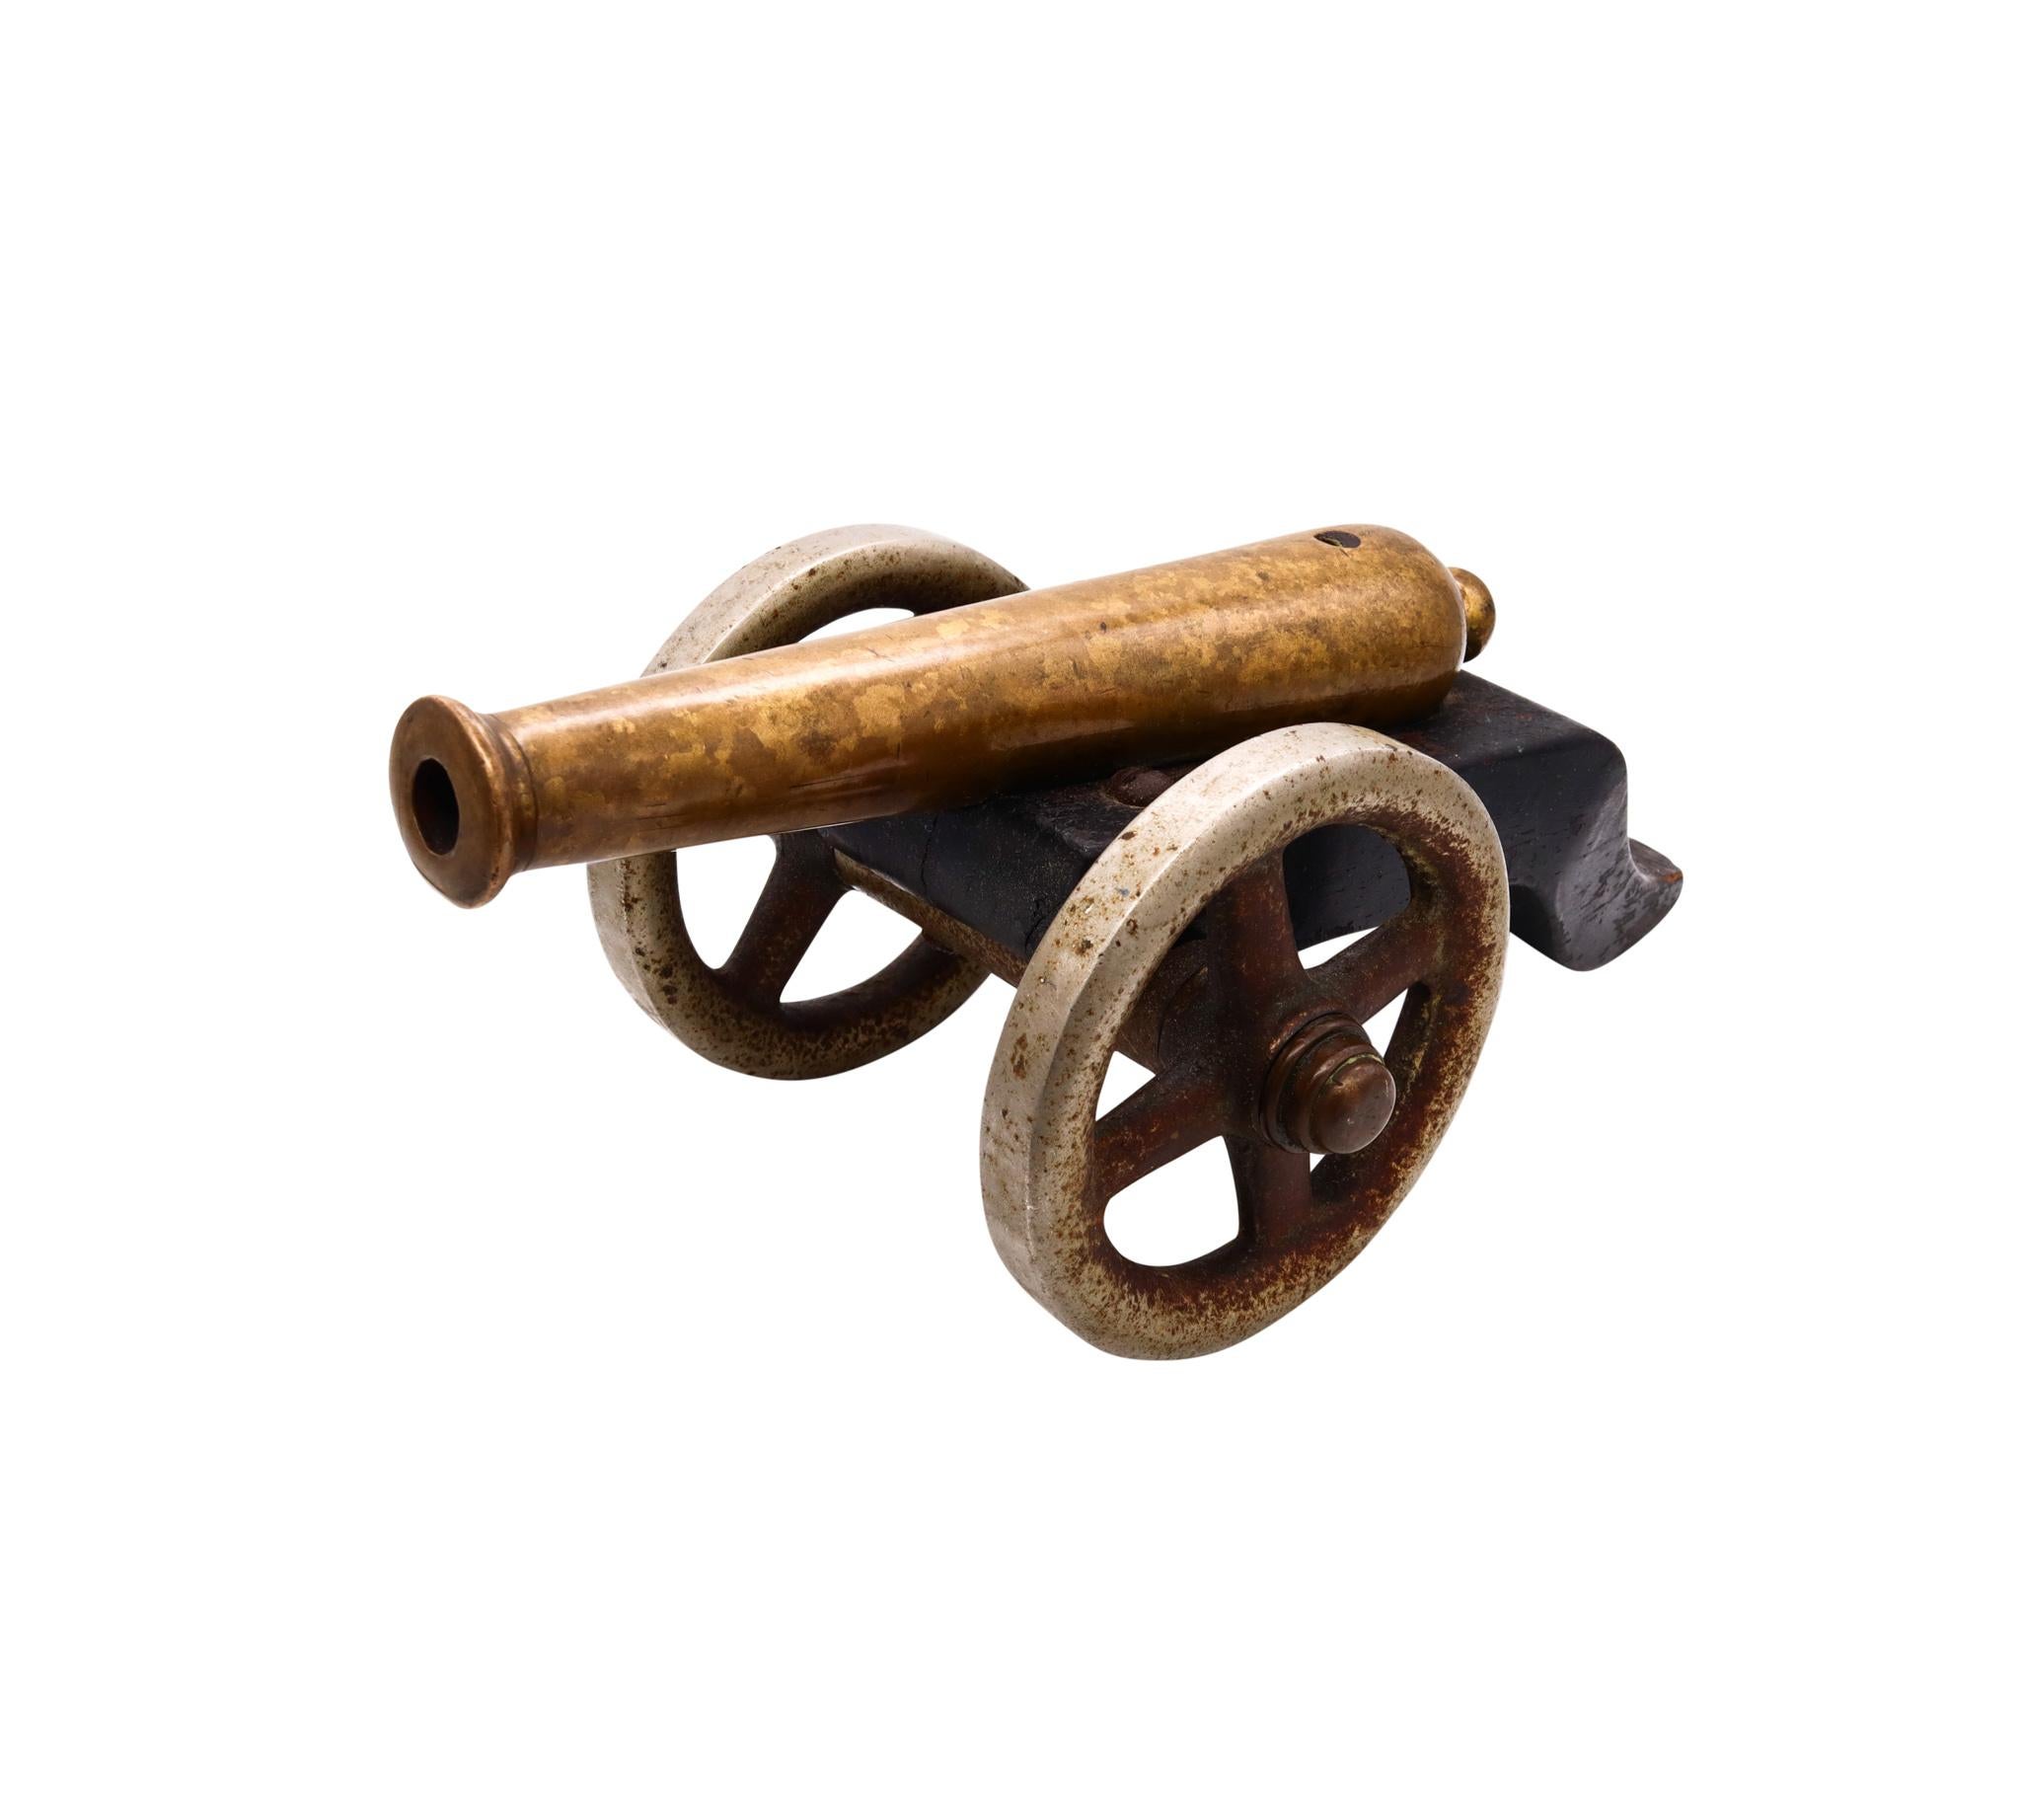 European signal cannon from the 18th century.

An antique piece made and used in Europe, circa 1750.

This kind of small scale toys were made to be used in the navy of some european country, to send firing signals ship to ship. Signal cannons